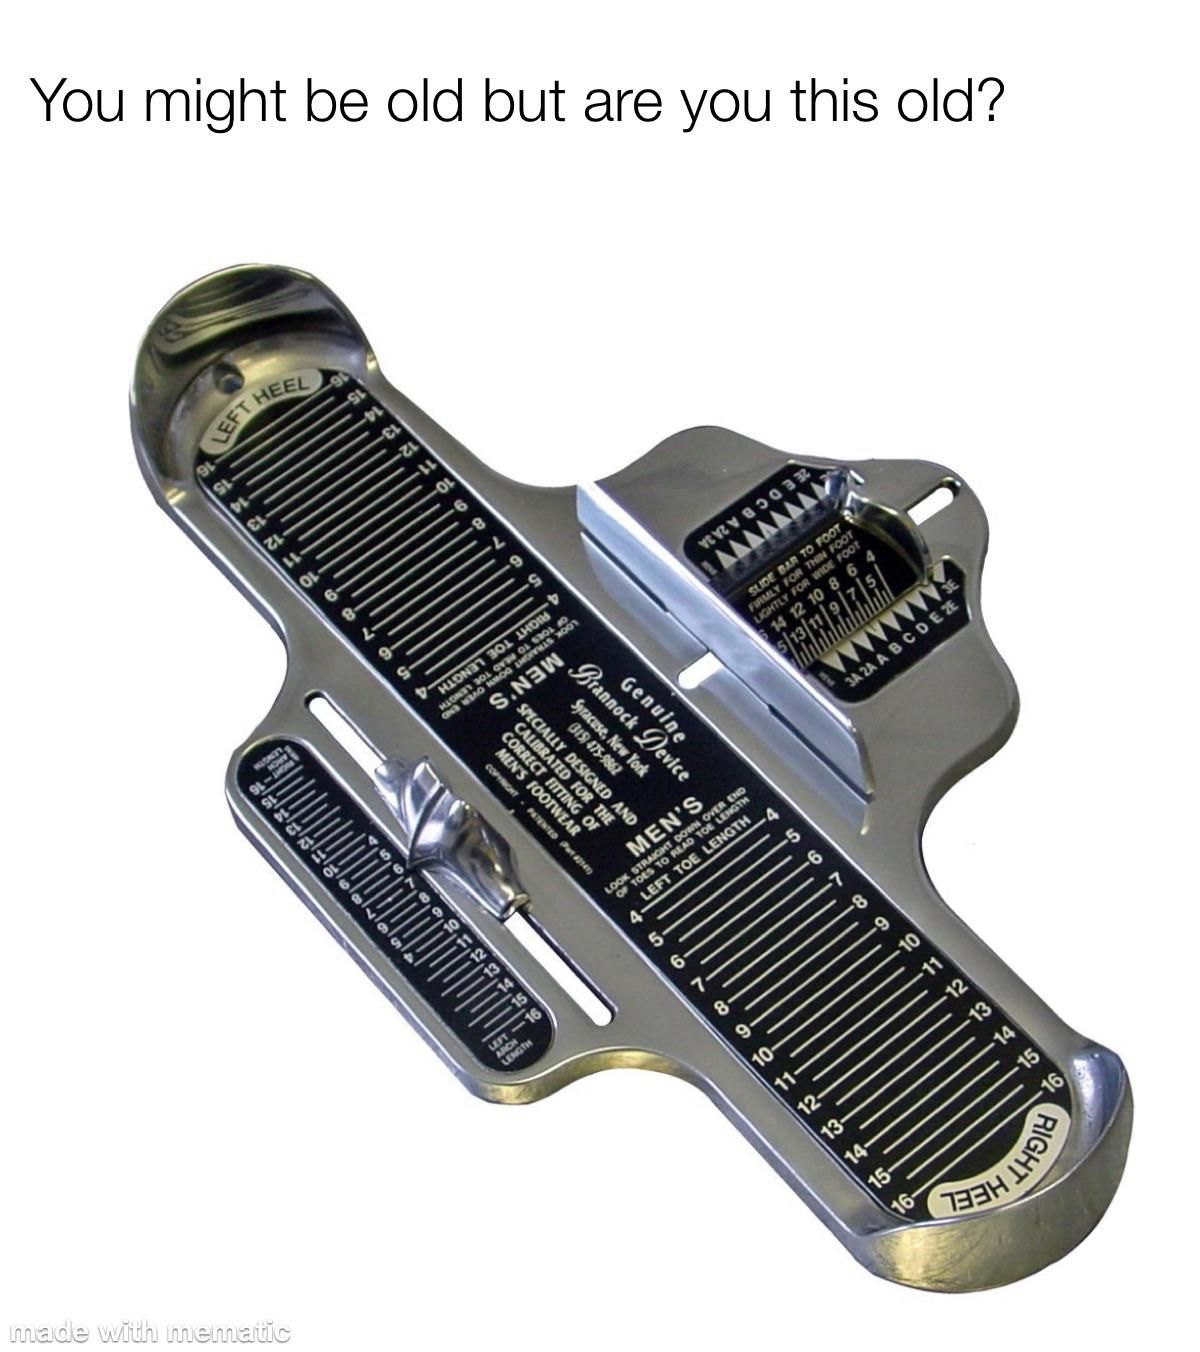 You might be old but are you this old?